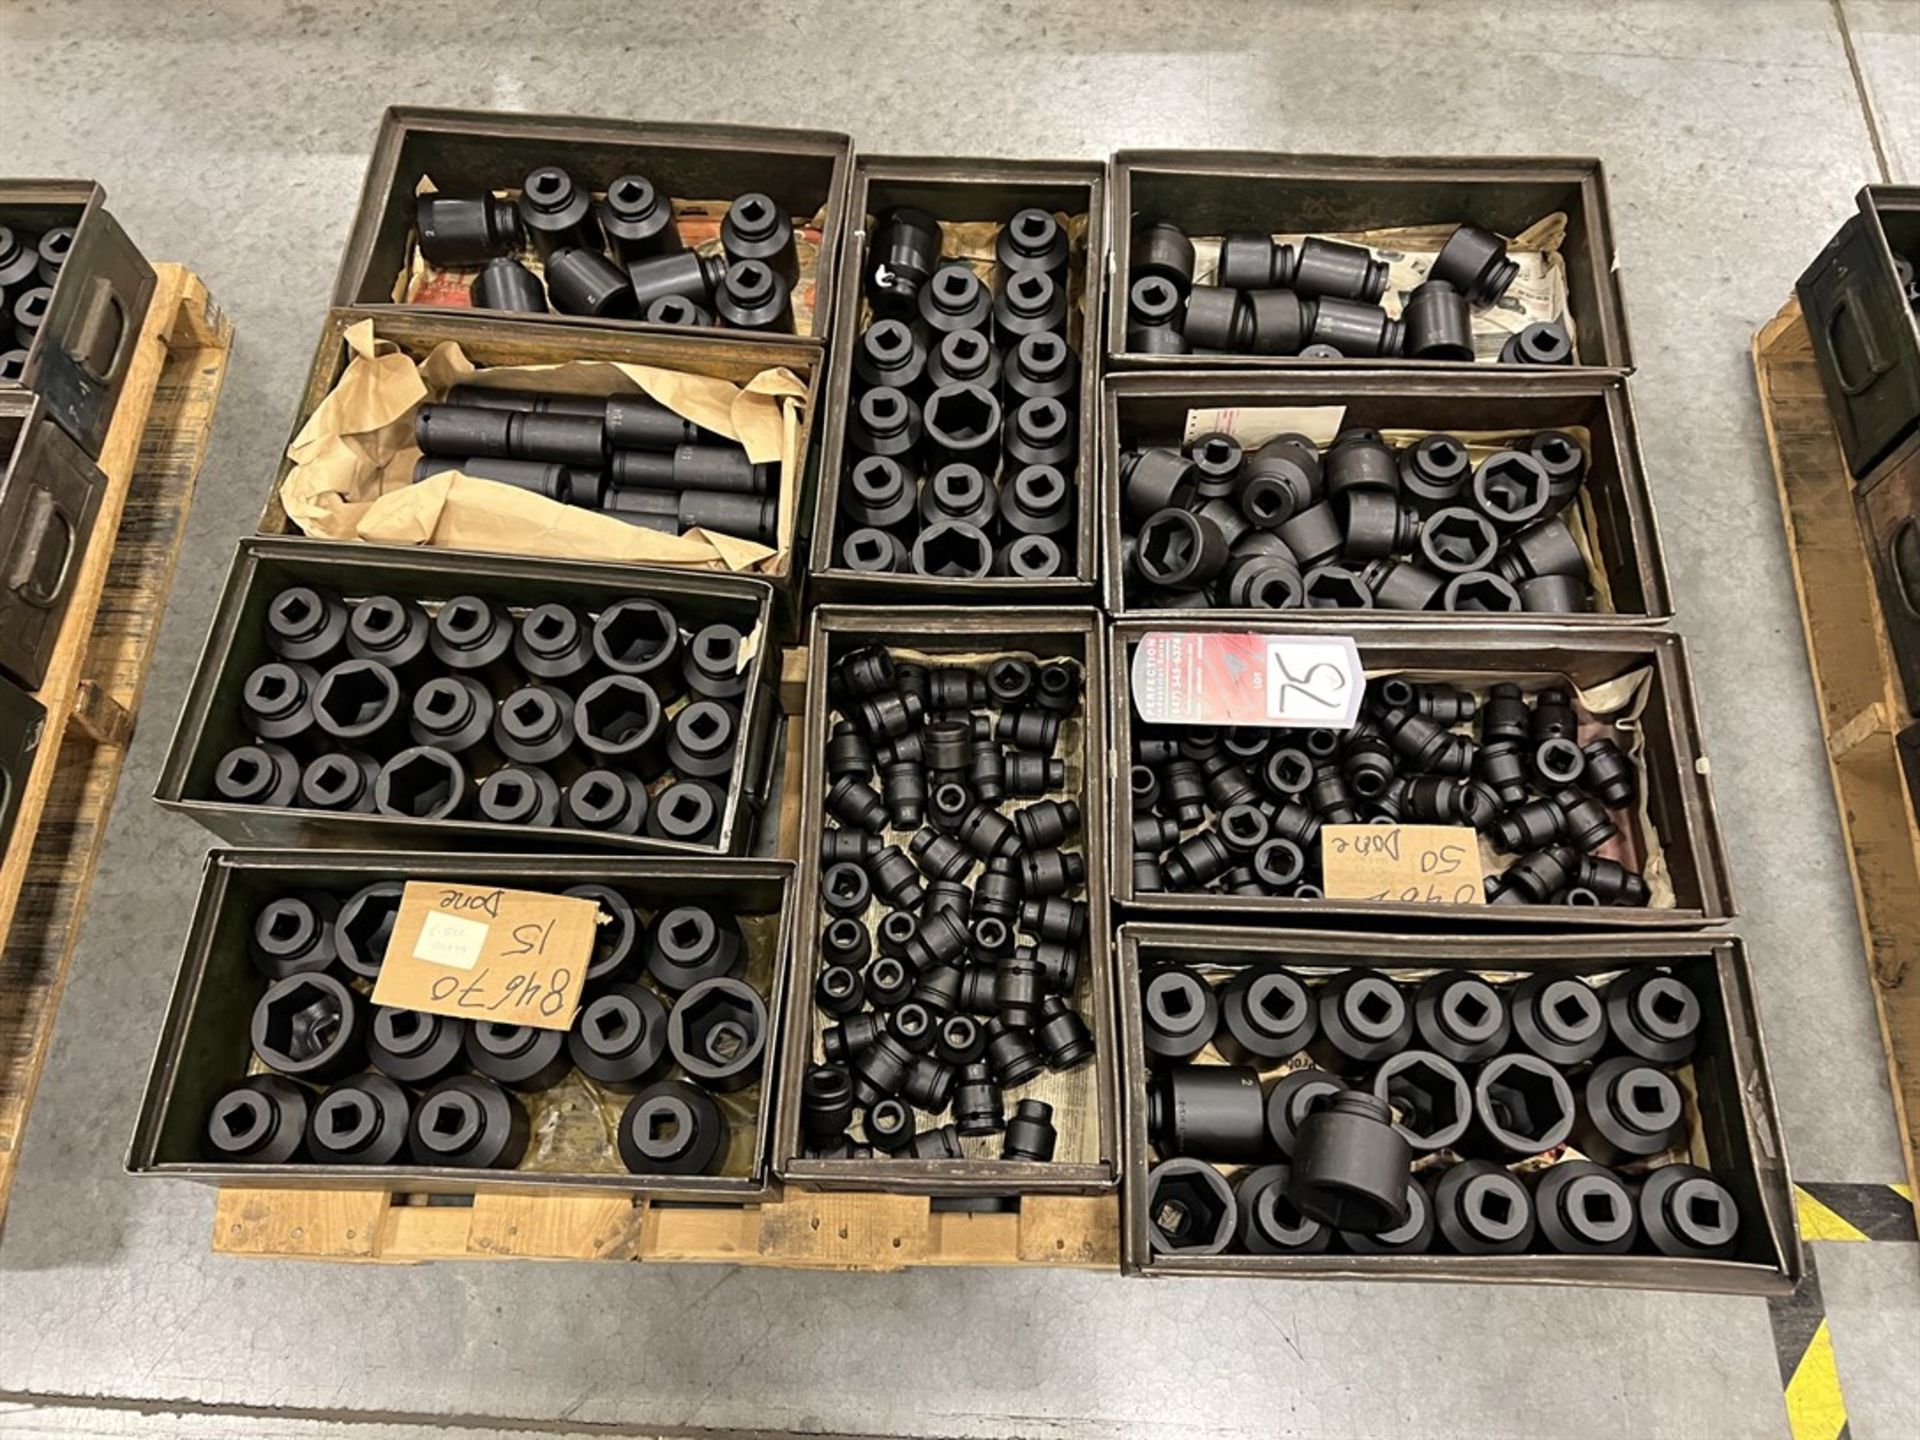 Pallet of 3/4" Drive Impact Sockets from 5/8" to 2-3/16"